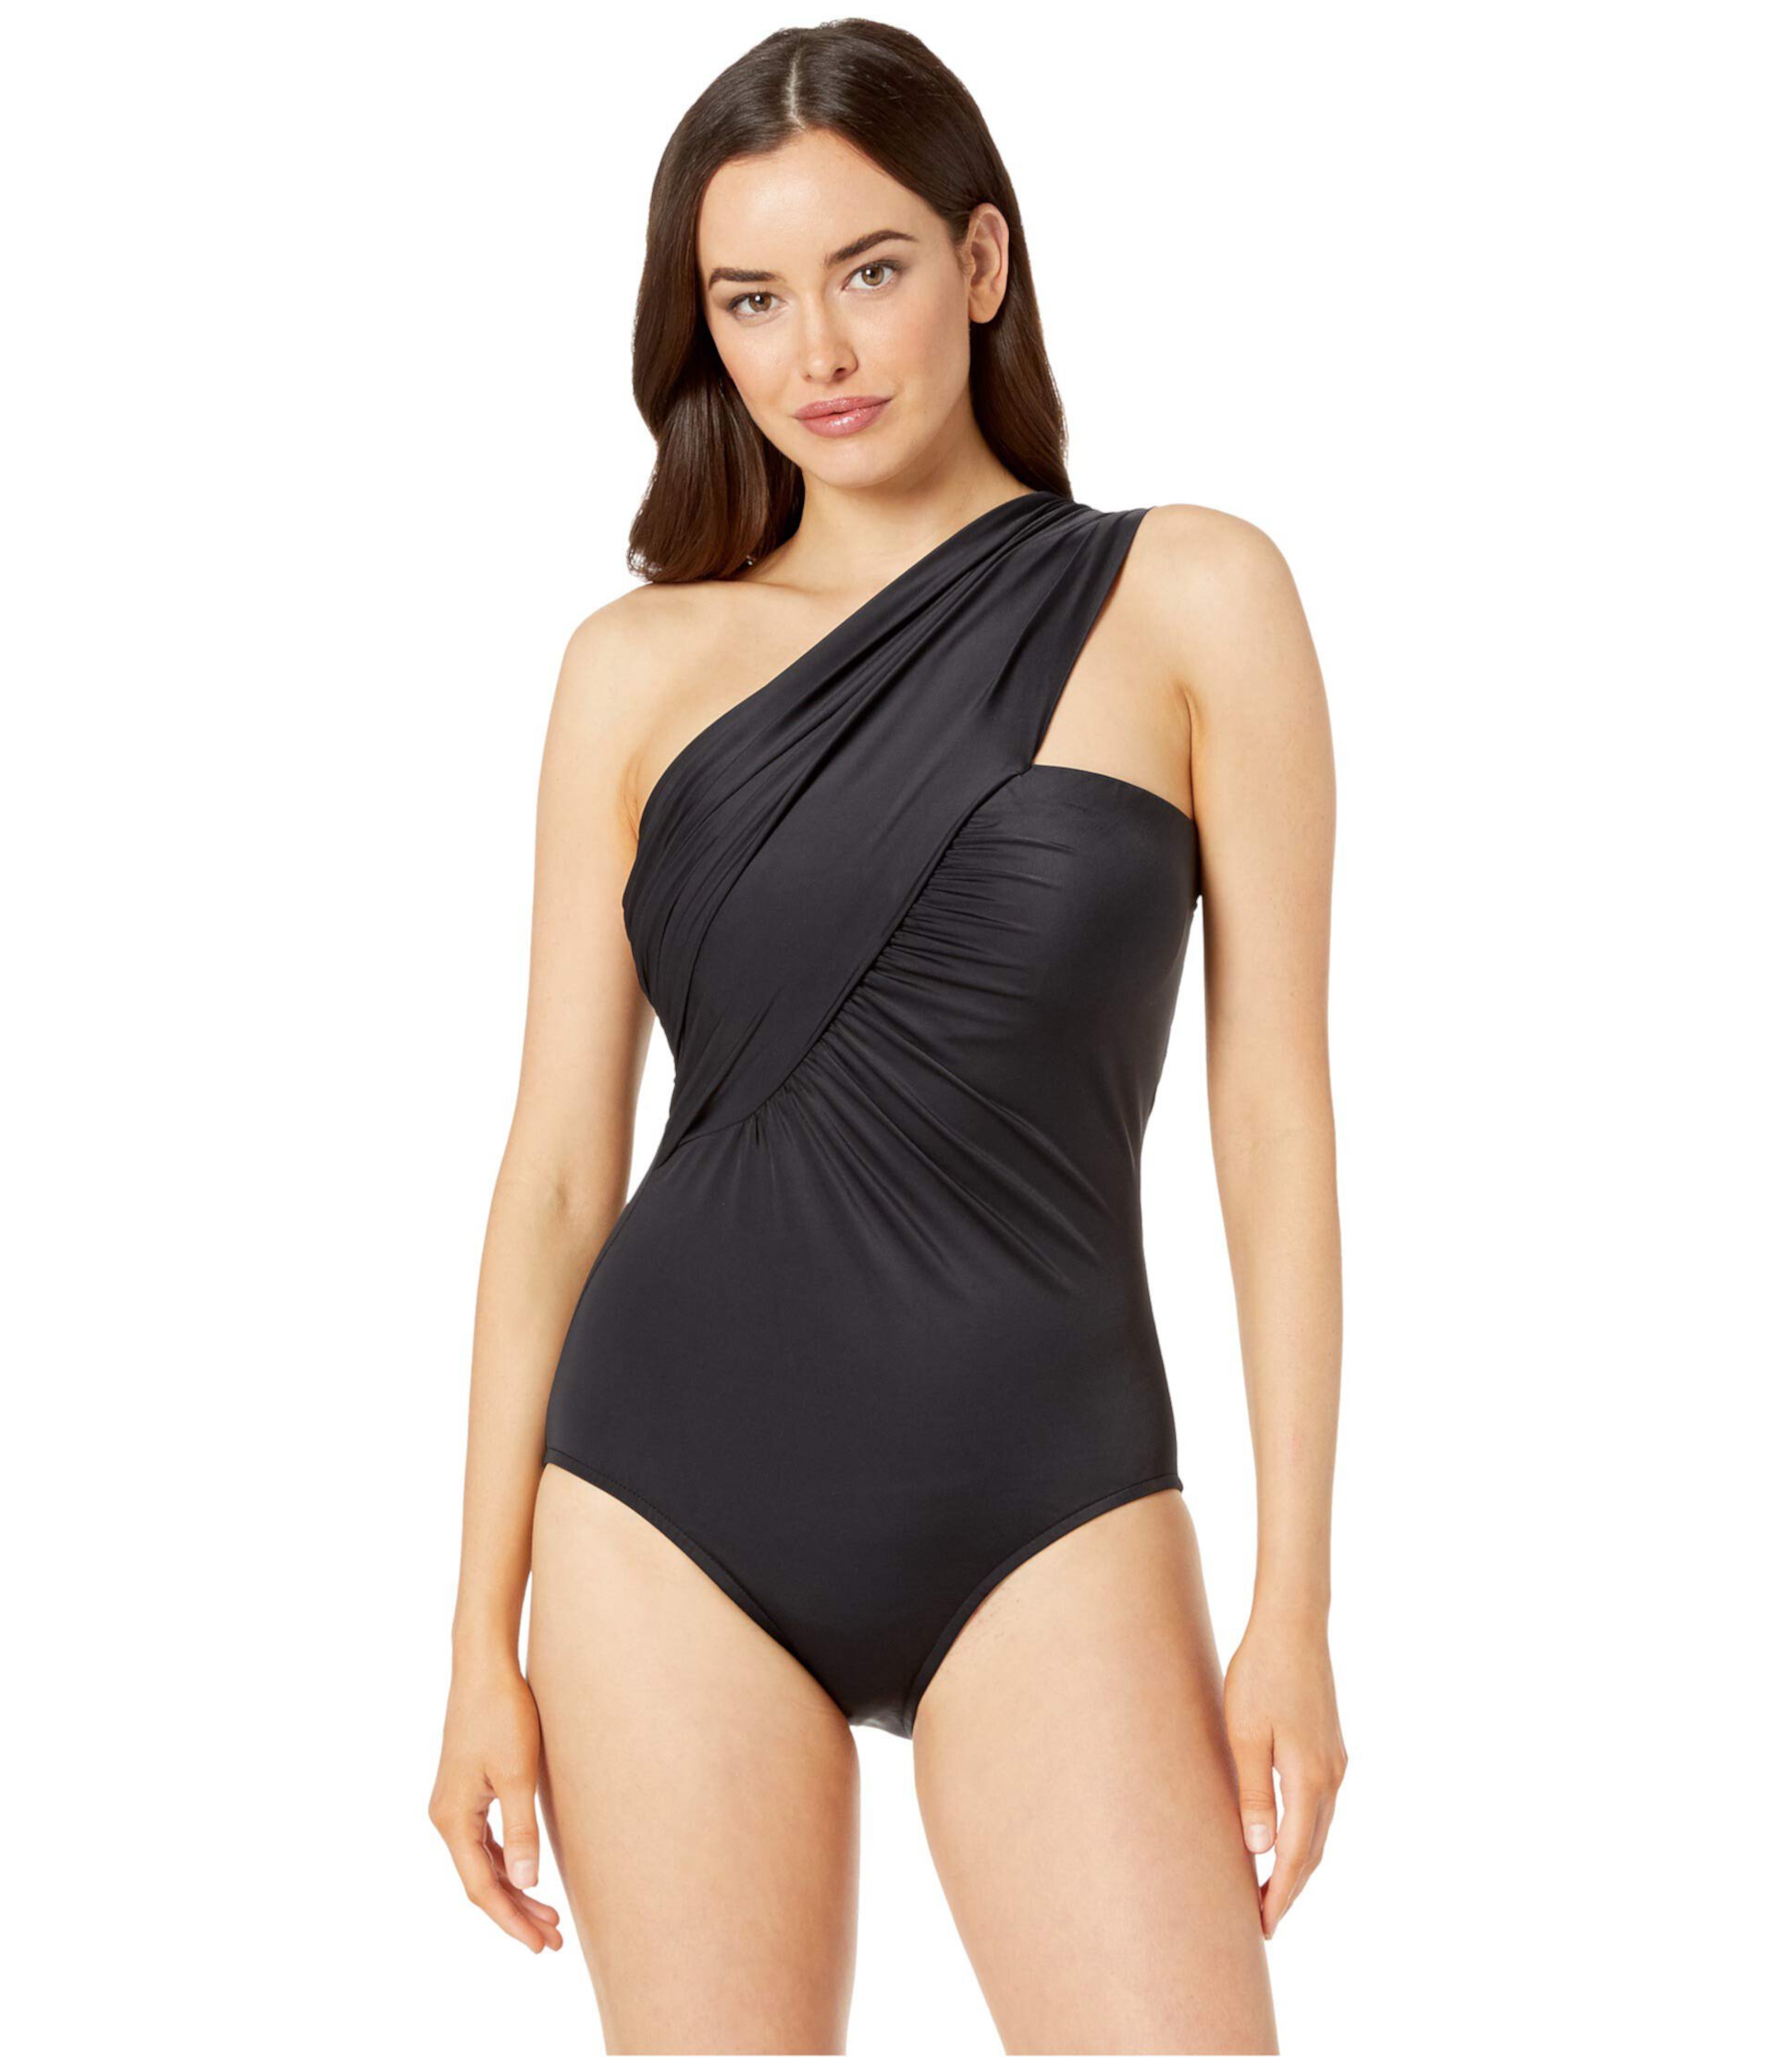 Solid Goddess One-Piece Magicsuit